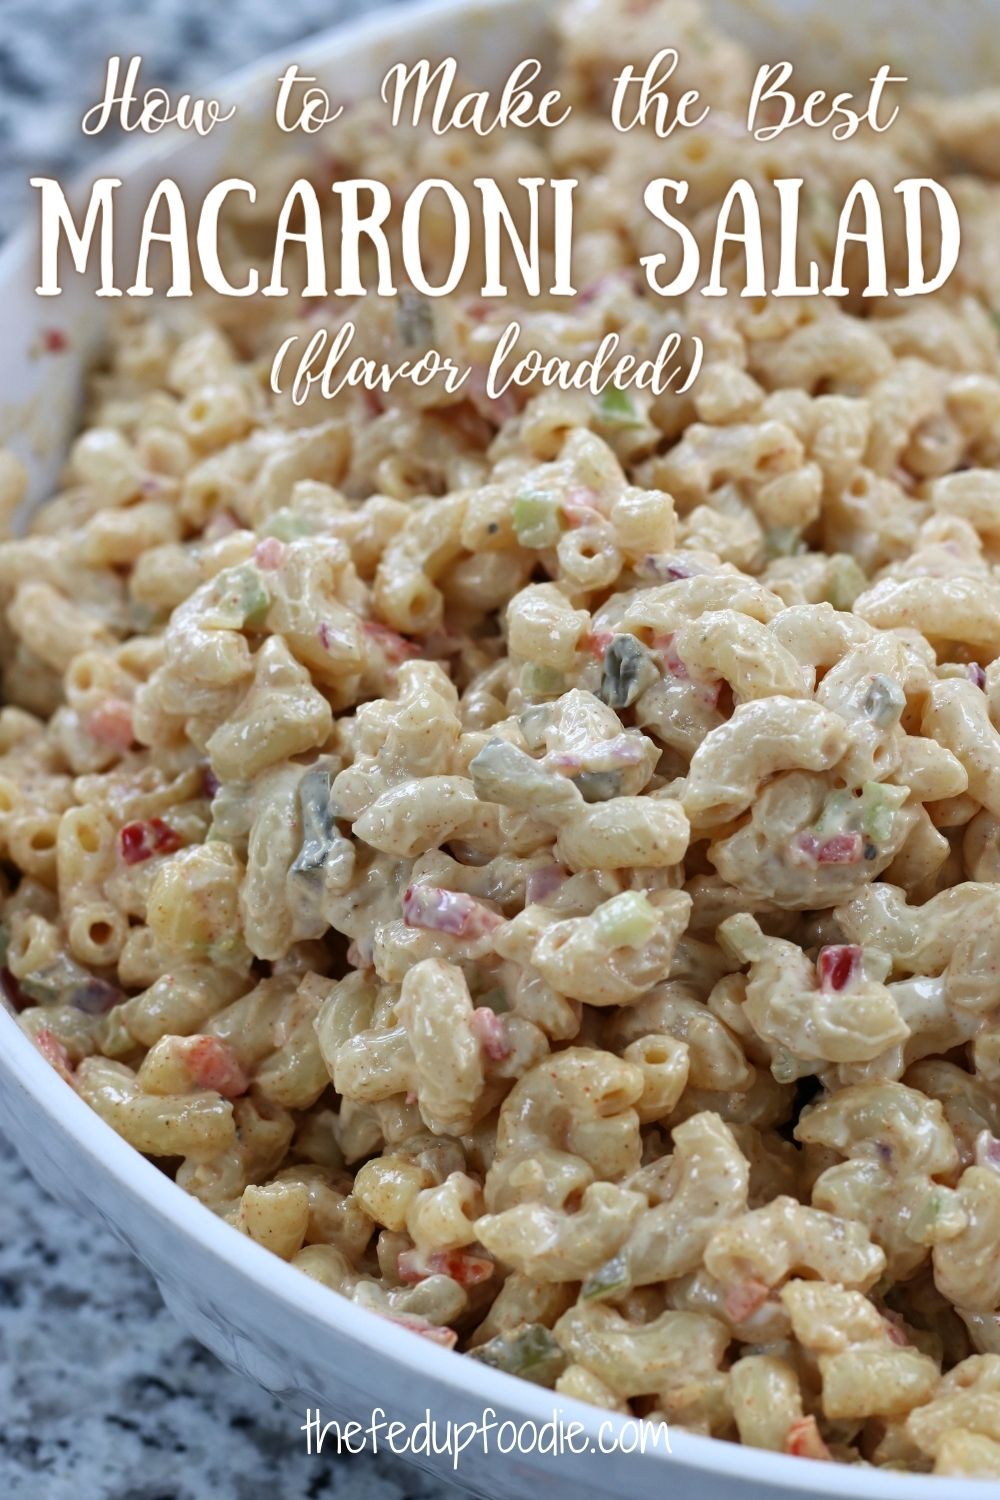 Creamy, crunchy and flavorful cold Macaroni Salad is an easy and foolproof side dish perfect for BBQ's and get togethers. Included are tips and secrets to making an irresistible classic creamy pasta salad that is sure to become a family favorite.
#MacaroniSalad #MacaroniSaladRecipe #EasyMacaroniSalad #CreamyMacaroniSalad #BestMacaroniSalad #ColdMacaroniSalad #HowToMakeMacaroniSalad